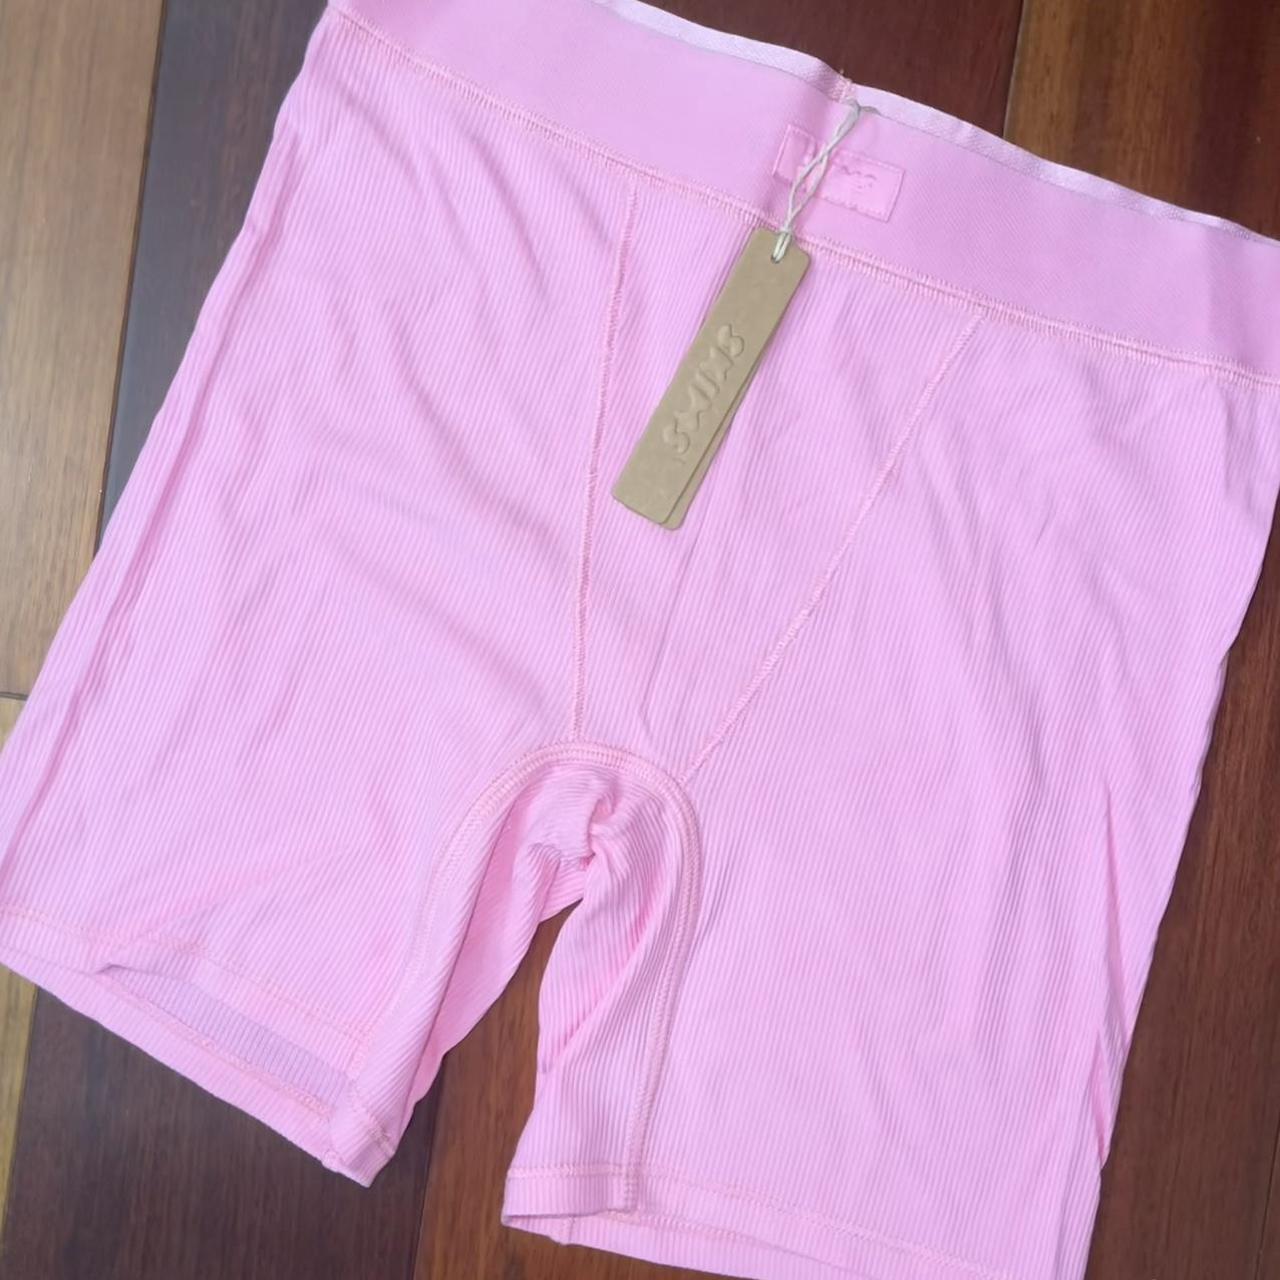 SKIMS RIB SOFT LOUNGE/SLEEP BOXERS IN COTTON CANDY, 